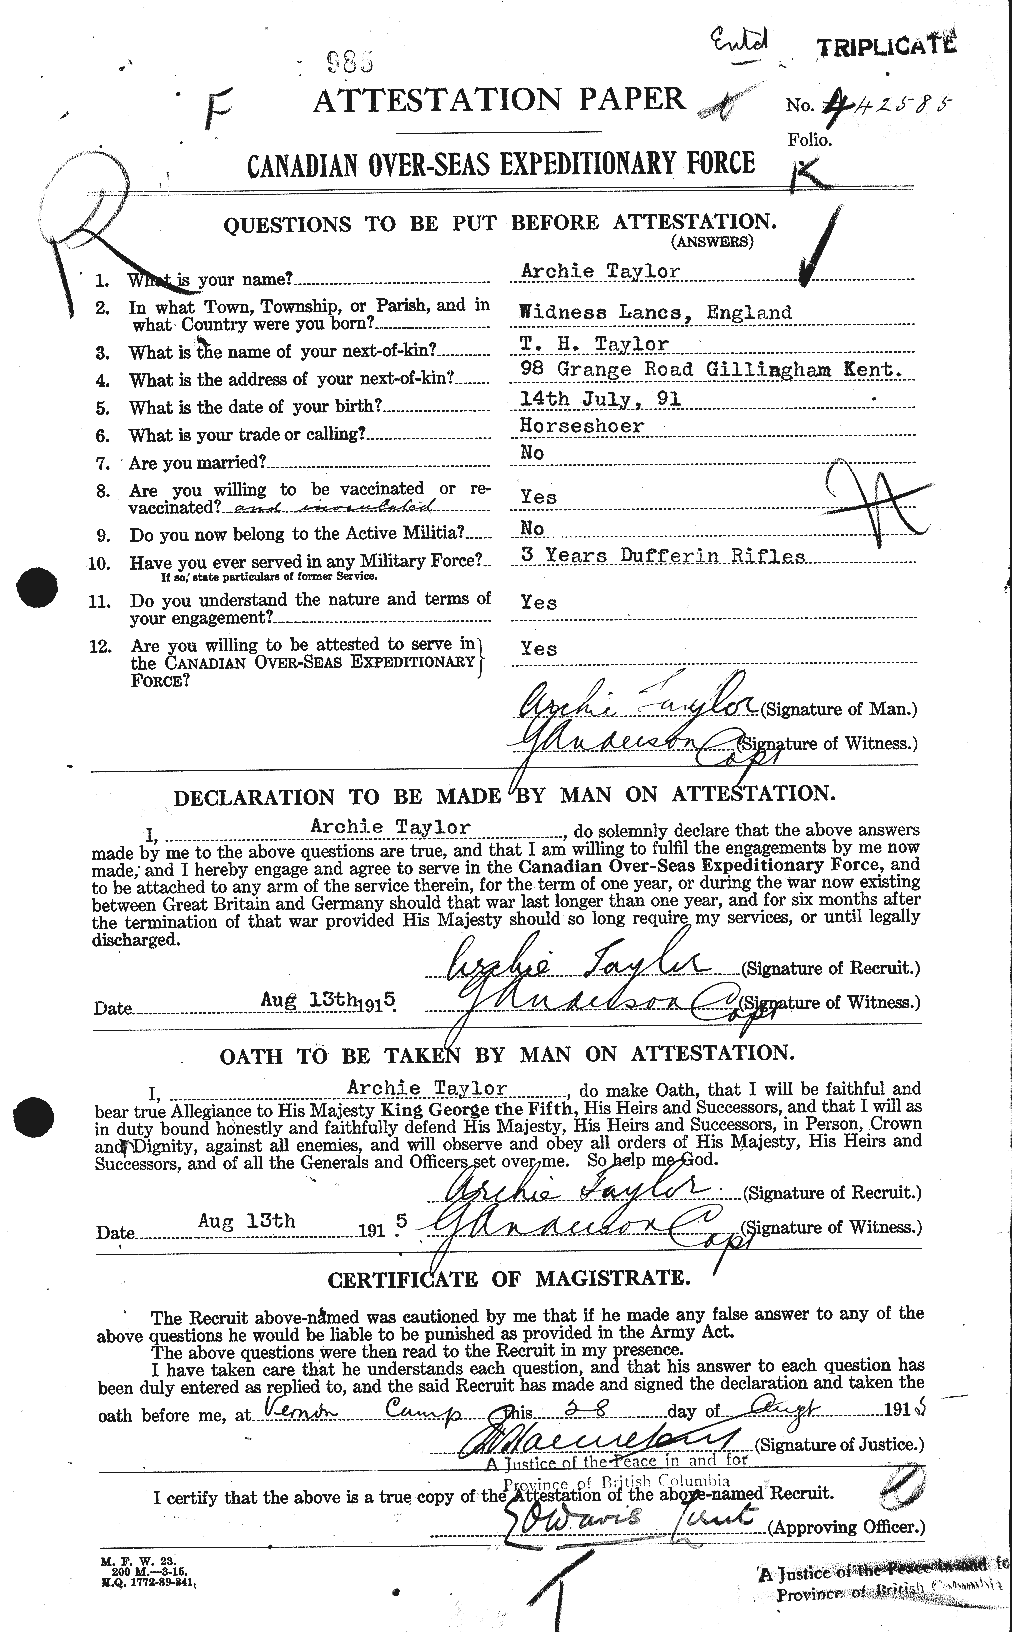 Personnel Records of the First World War - CEF 626245a